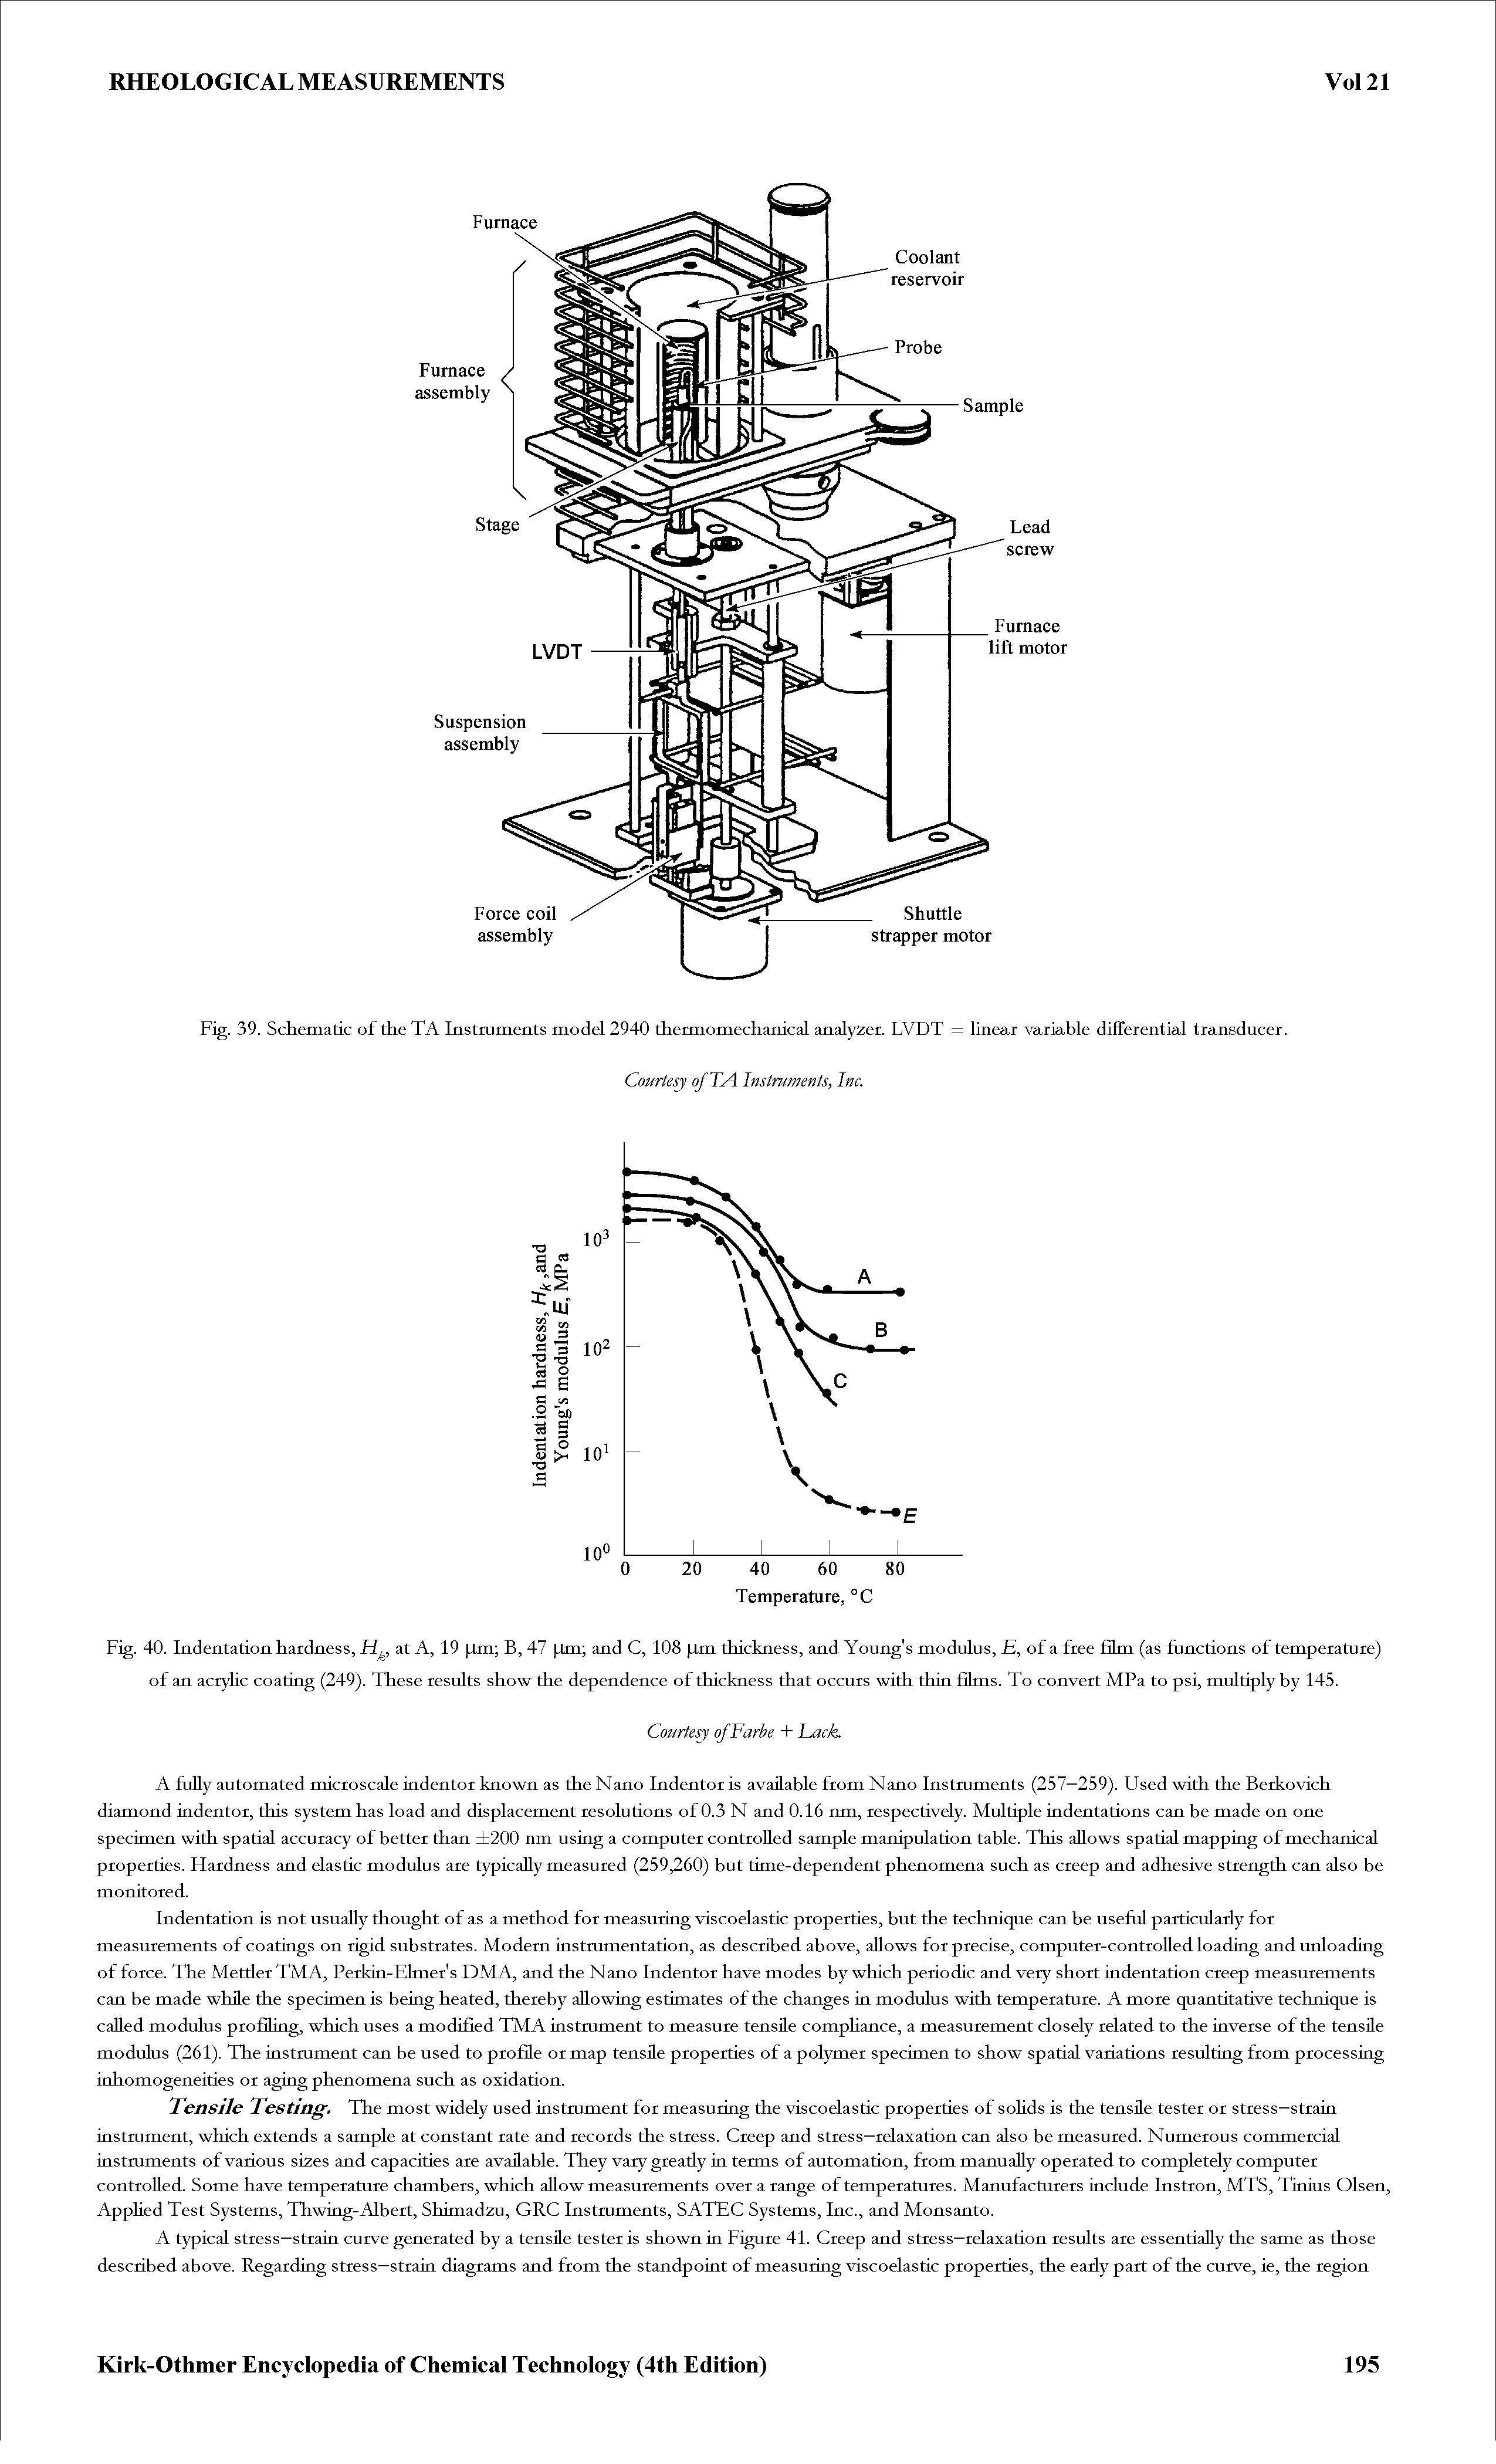 Fig. 39. Schematic of the TA Instmments model 2940 thermomechanical analyzer. LVDT = linear variable differential transducer.